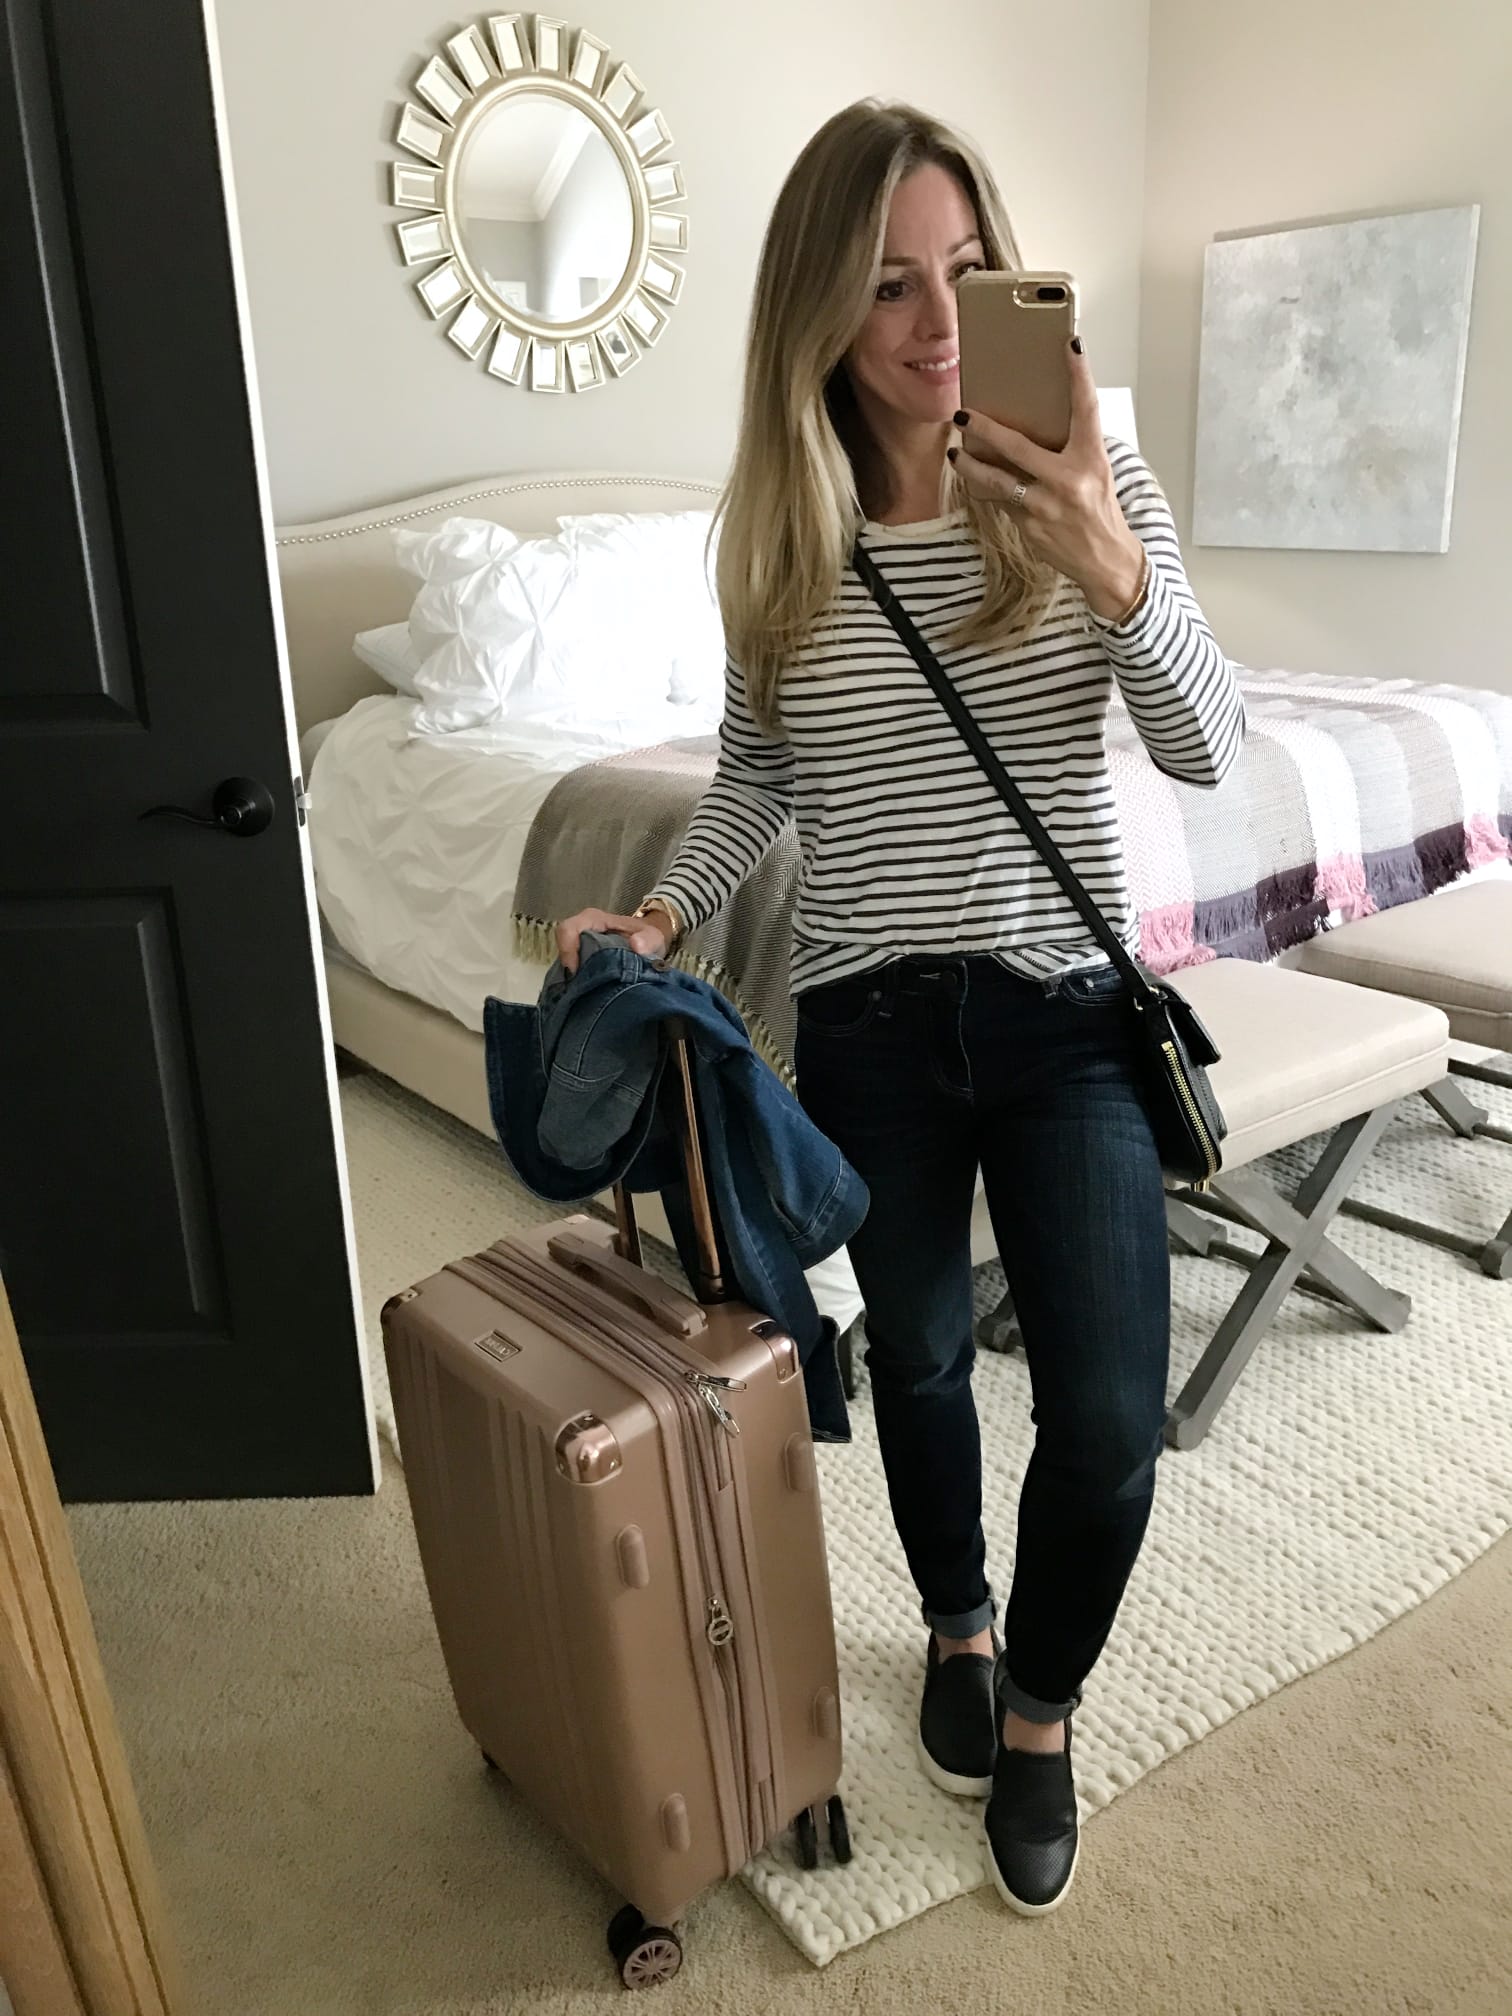 Fall fashion comfy travel outfit – striped top, jeans and slip on sneakers  with rose gold luggage – Honey We're Home